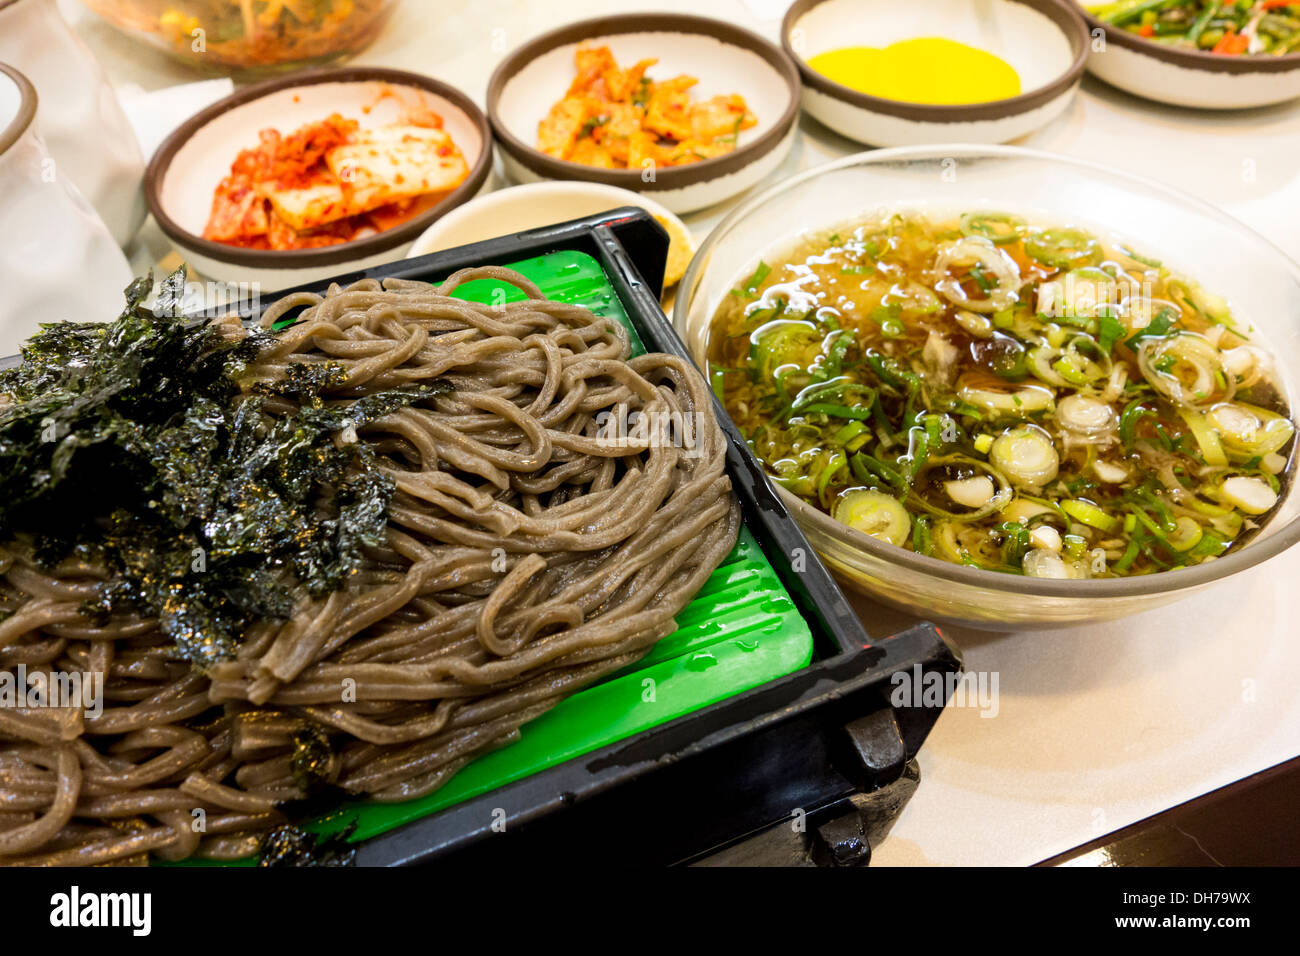 Memil guksu or soba (buckwheat noodle) with dipping sauce Stock Photo